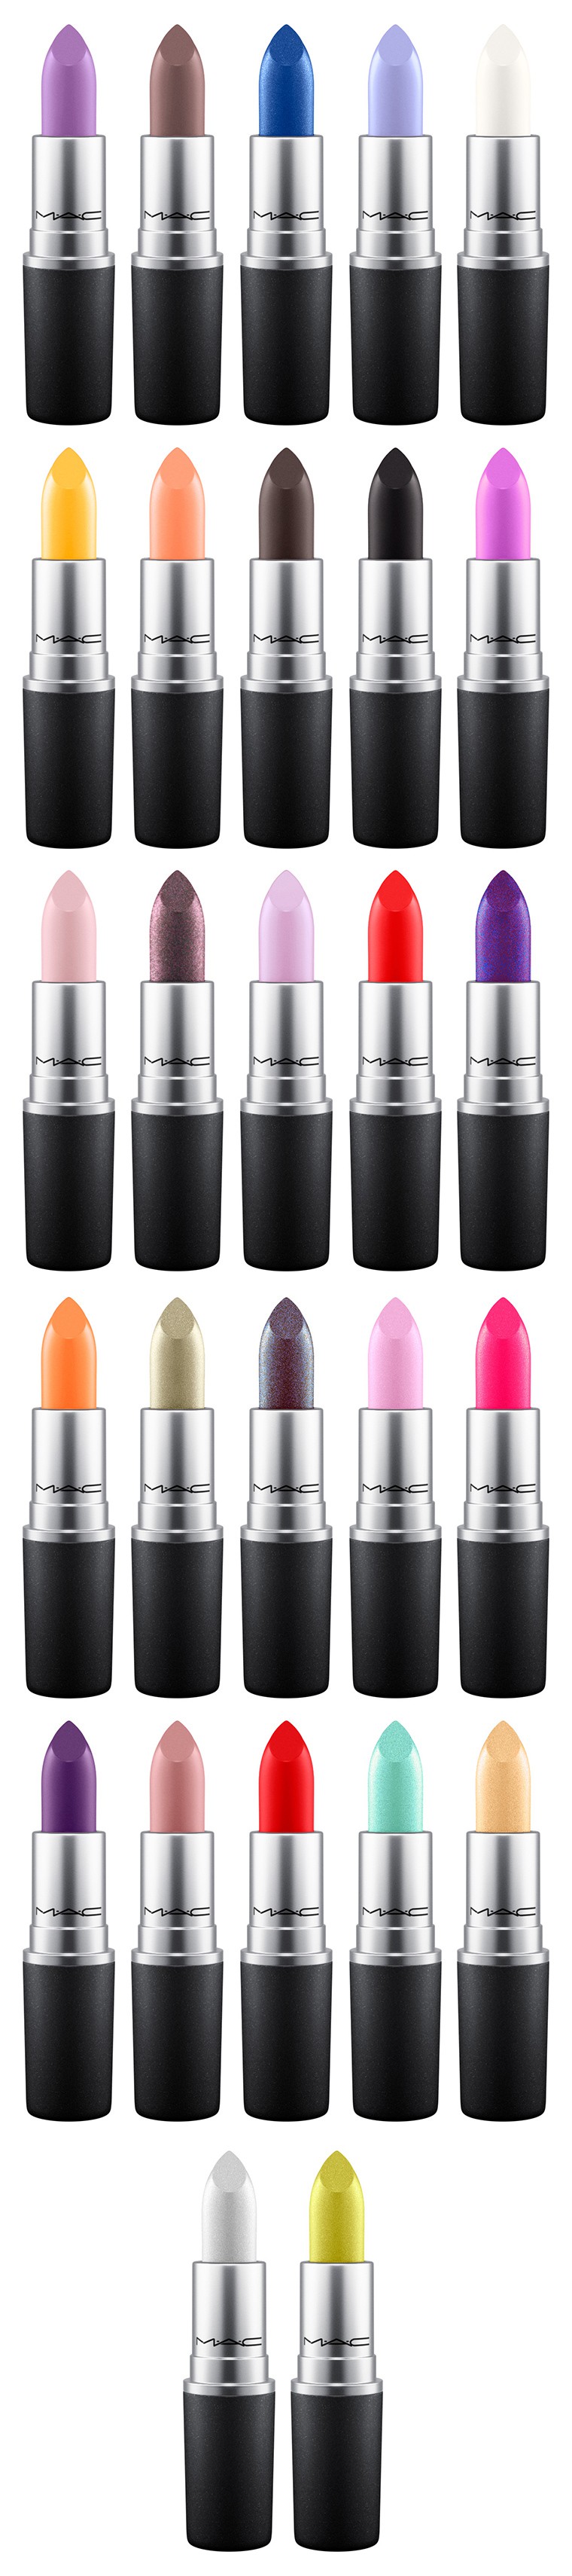 MAC Bangin' Brilliant Collection for June 2016